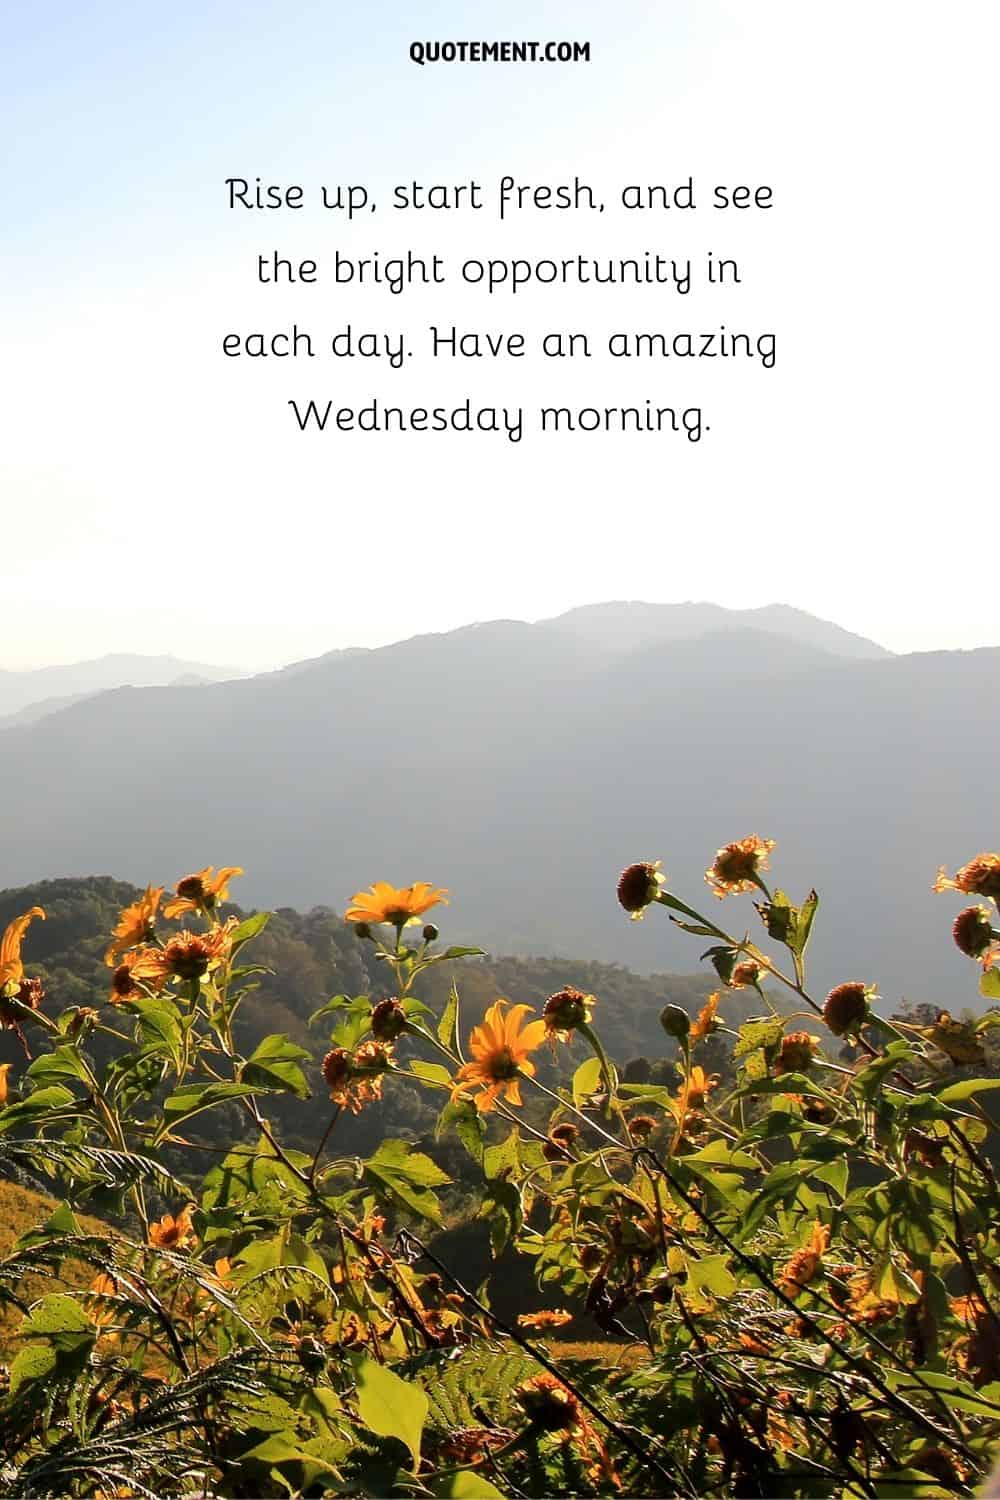 yellow flowers blooming atop a sun-kissed hill representing Wednesday morning inspirational quote